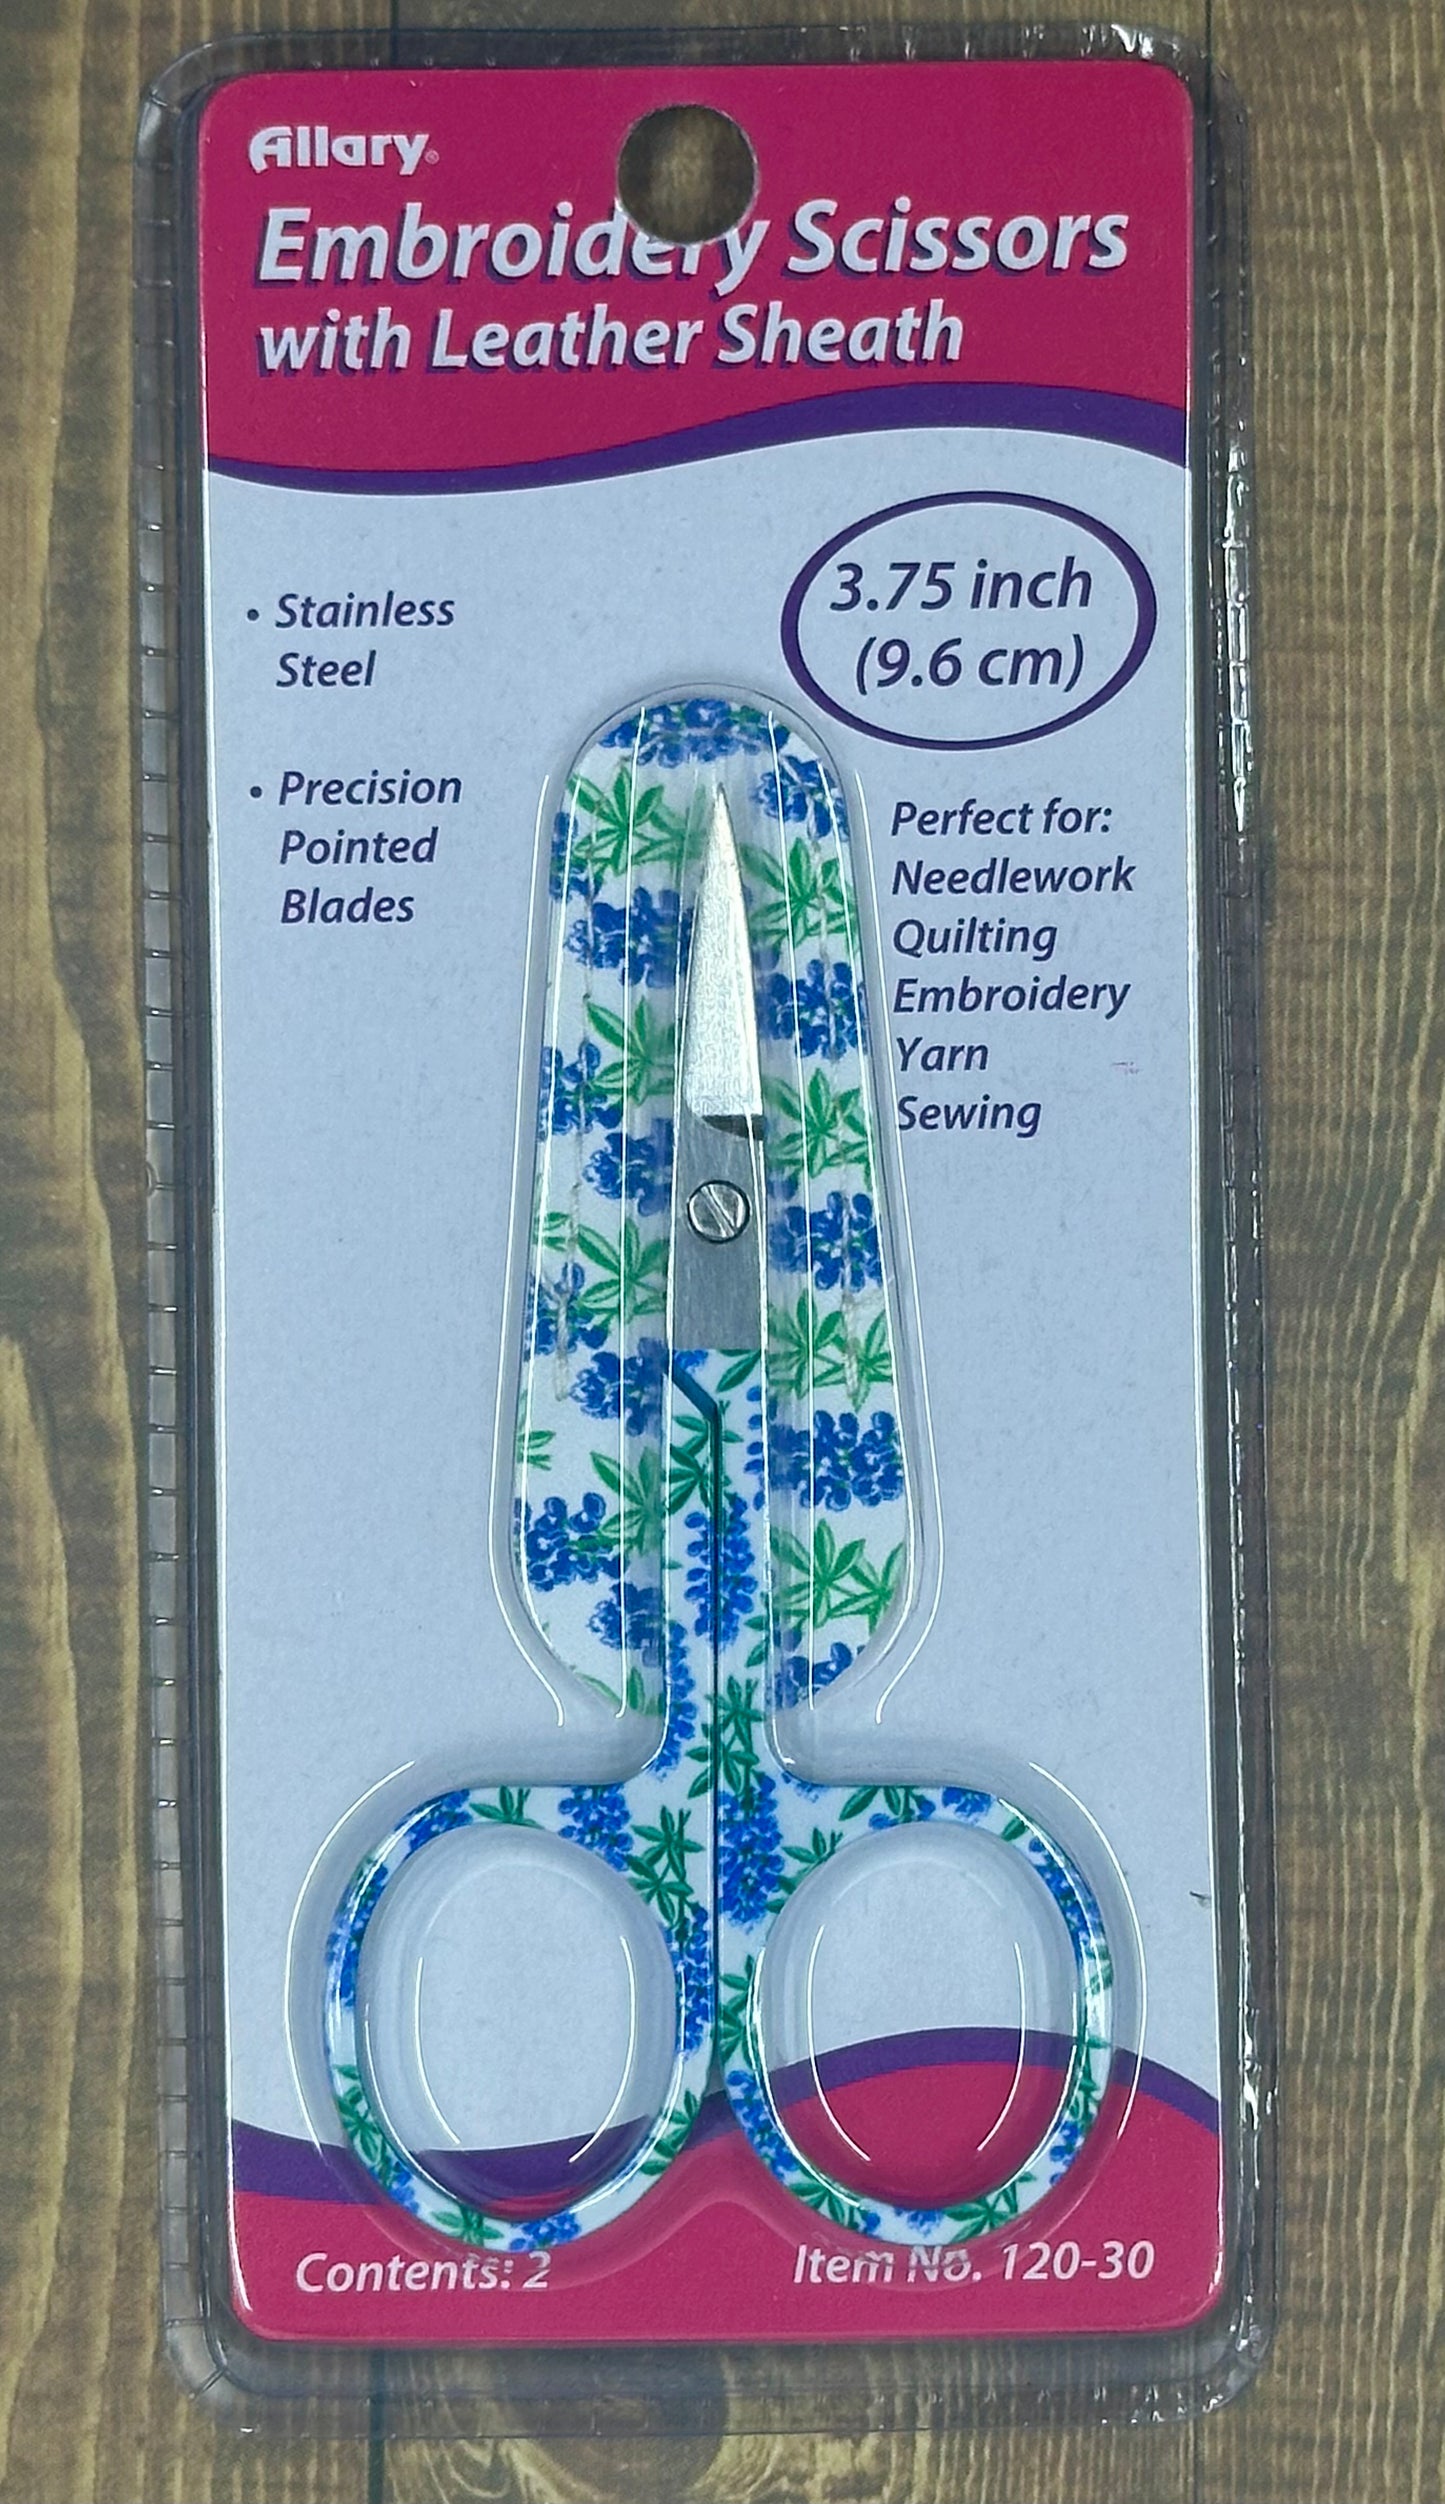 3.75" Embroidery Scissor with Leather Sheath